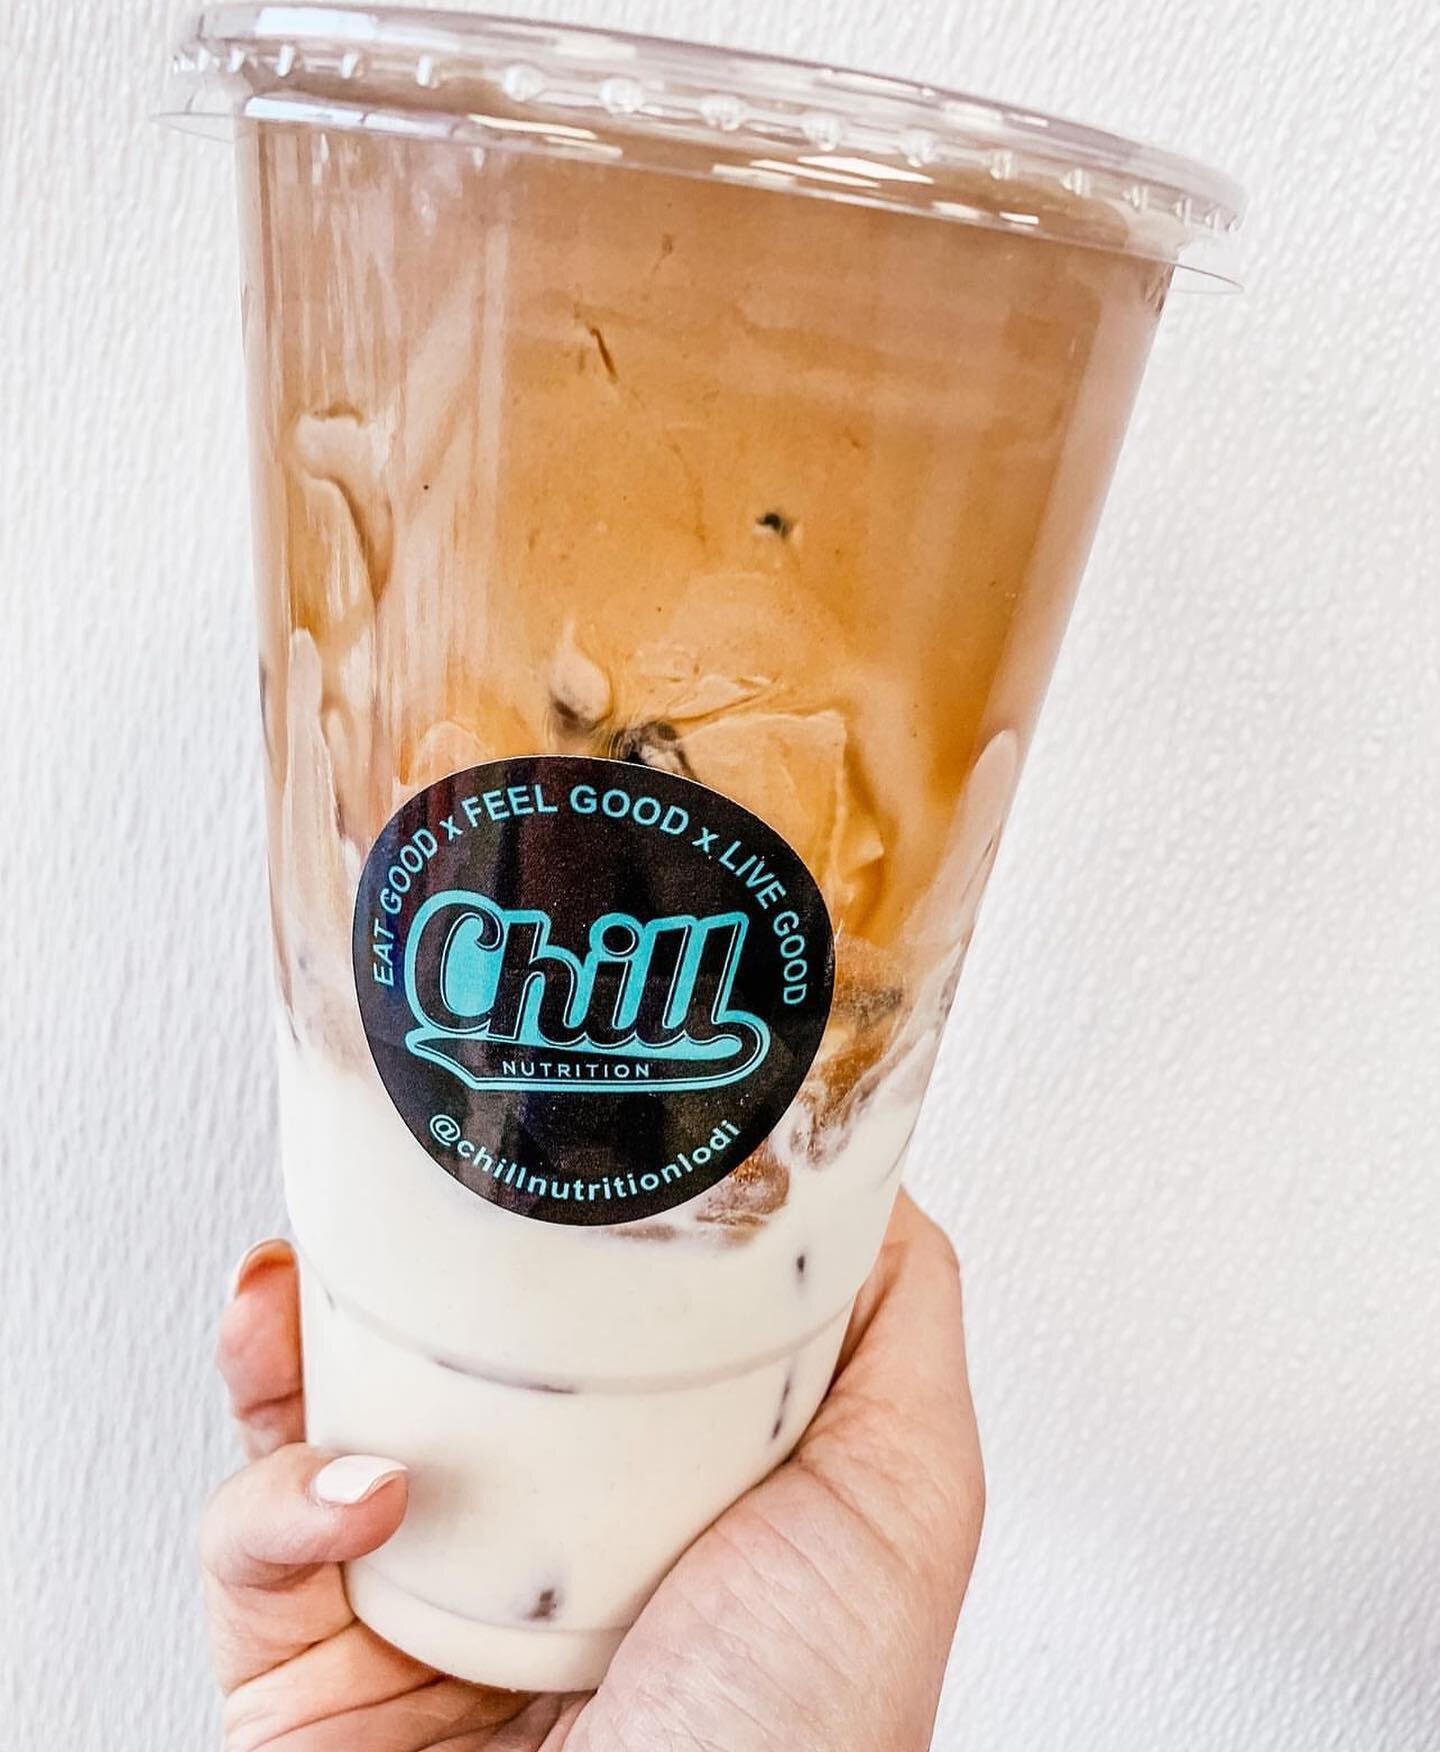 FRIYAY! 

The best way to end the work week! 
Something tasty AND healthy. 

📸featured drink: Iced Macchiato fat reducer. 

#chillnutritionlodi #lodidrinks #mealshakes #results #nutrition #fitness #lodilovers